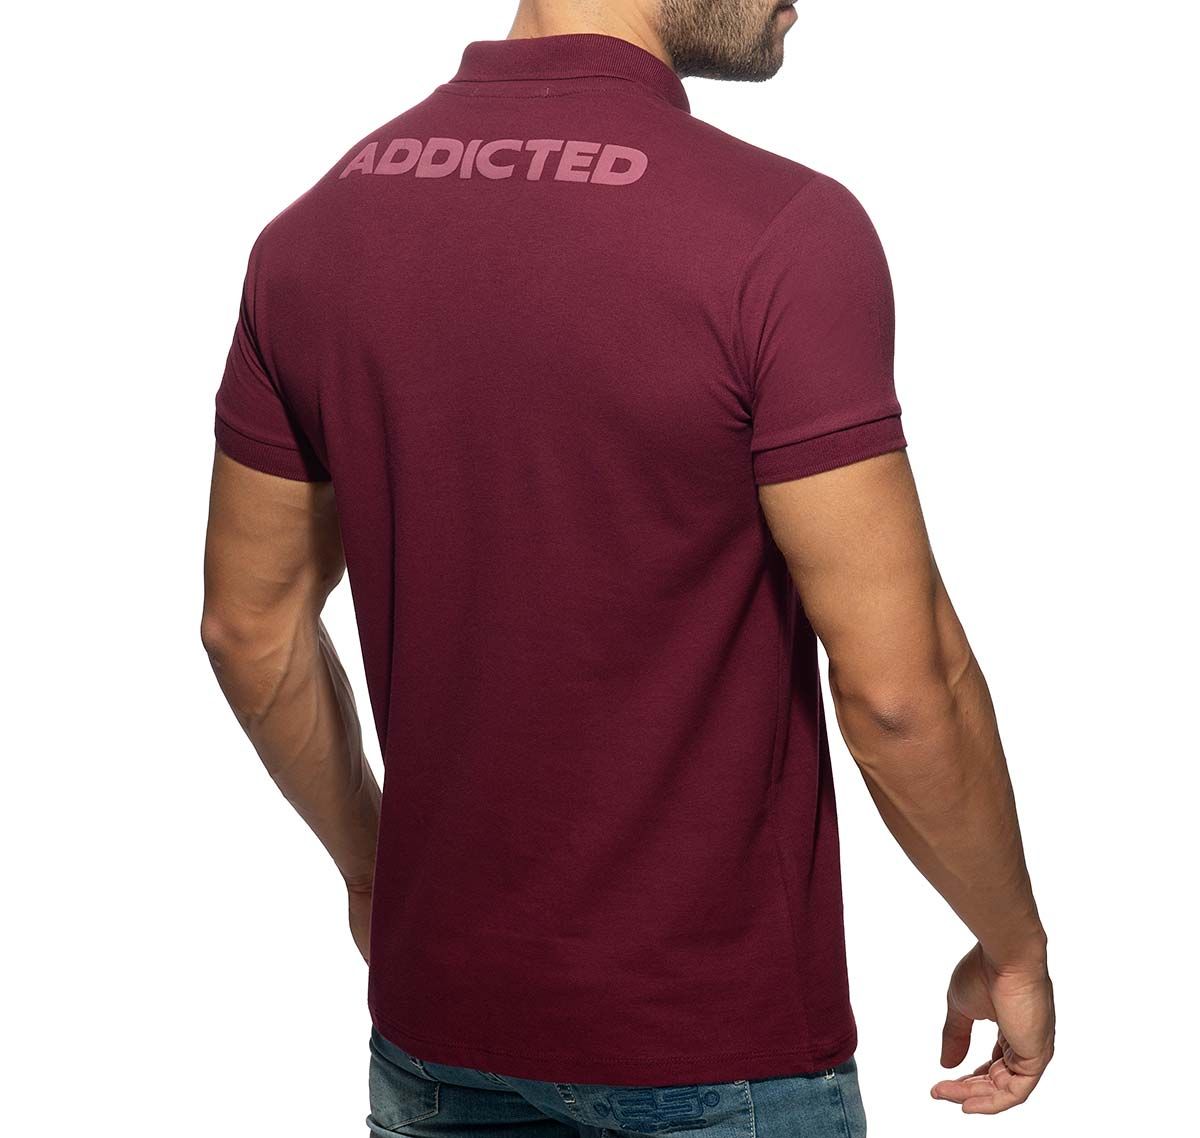 Addicted Polo AD CLASSIC POLO SHIRT AD949, rouge vin